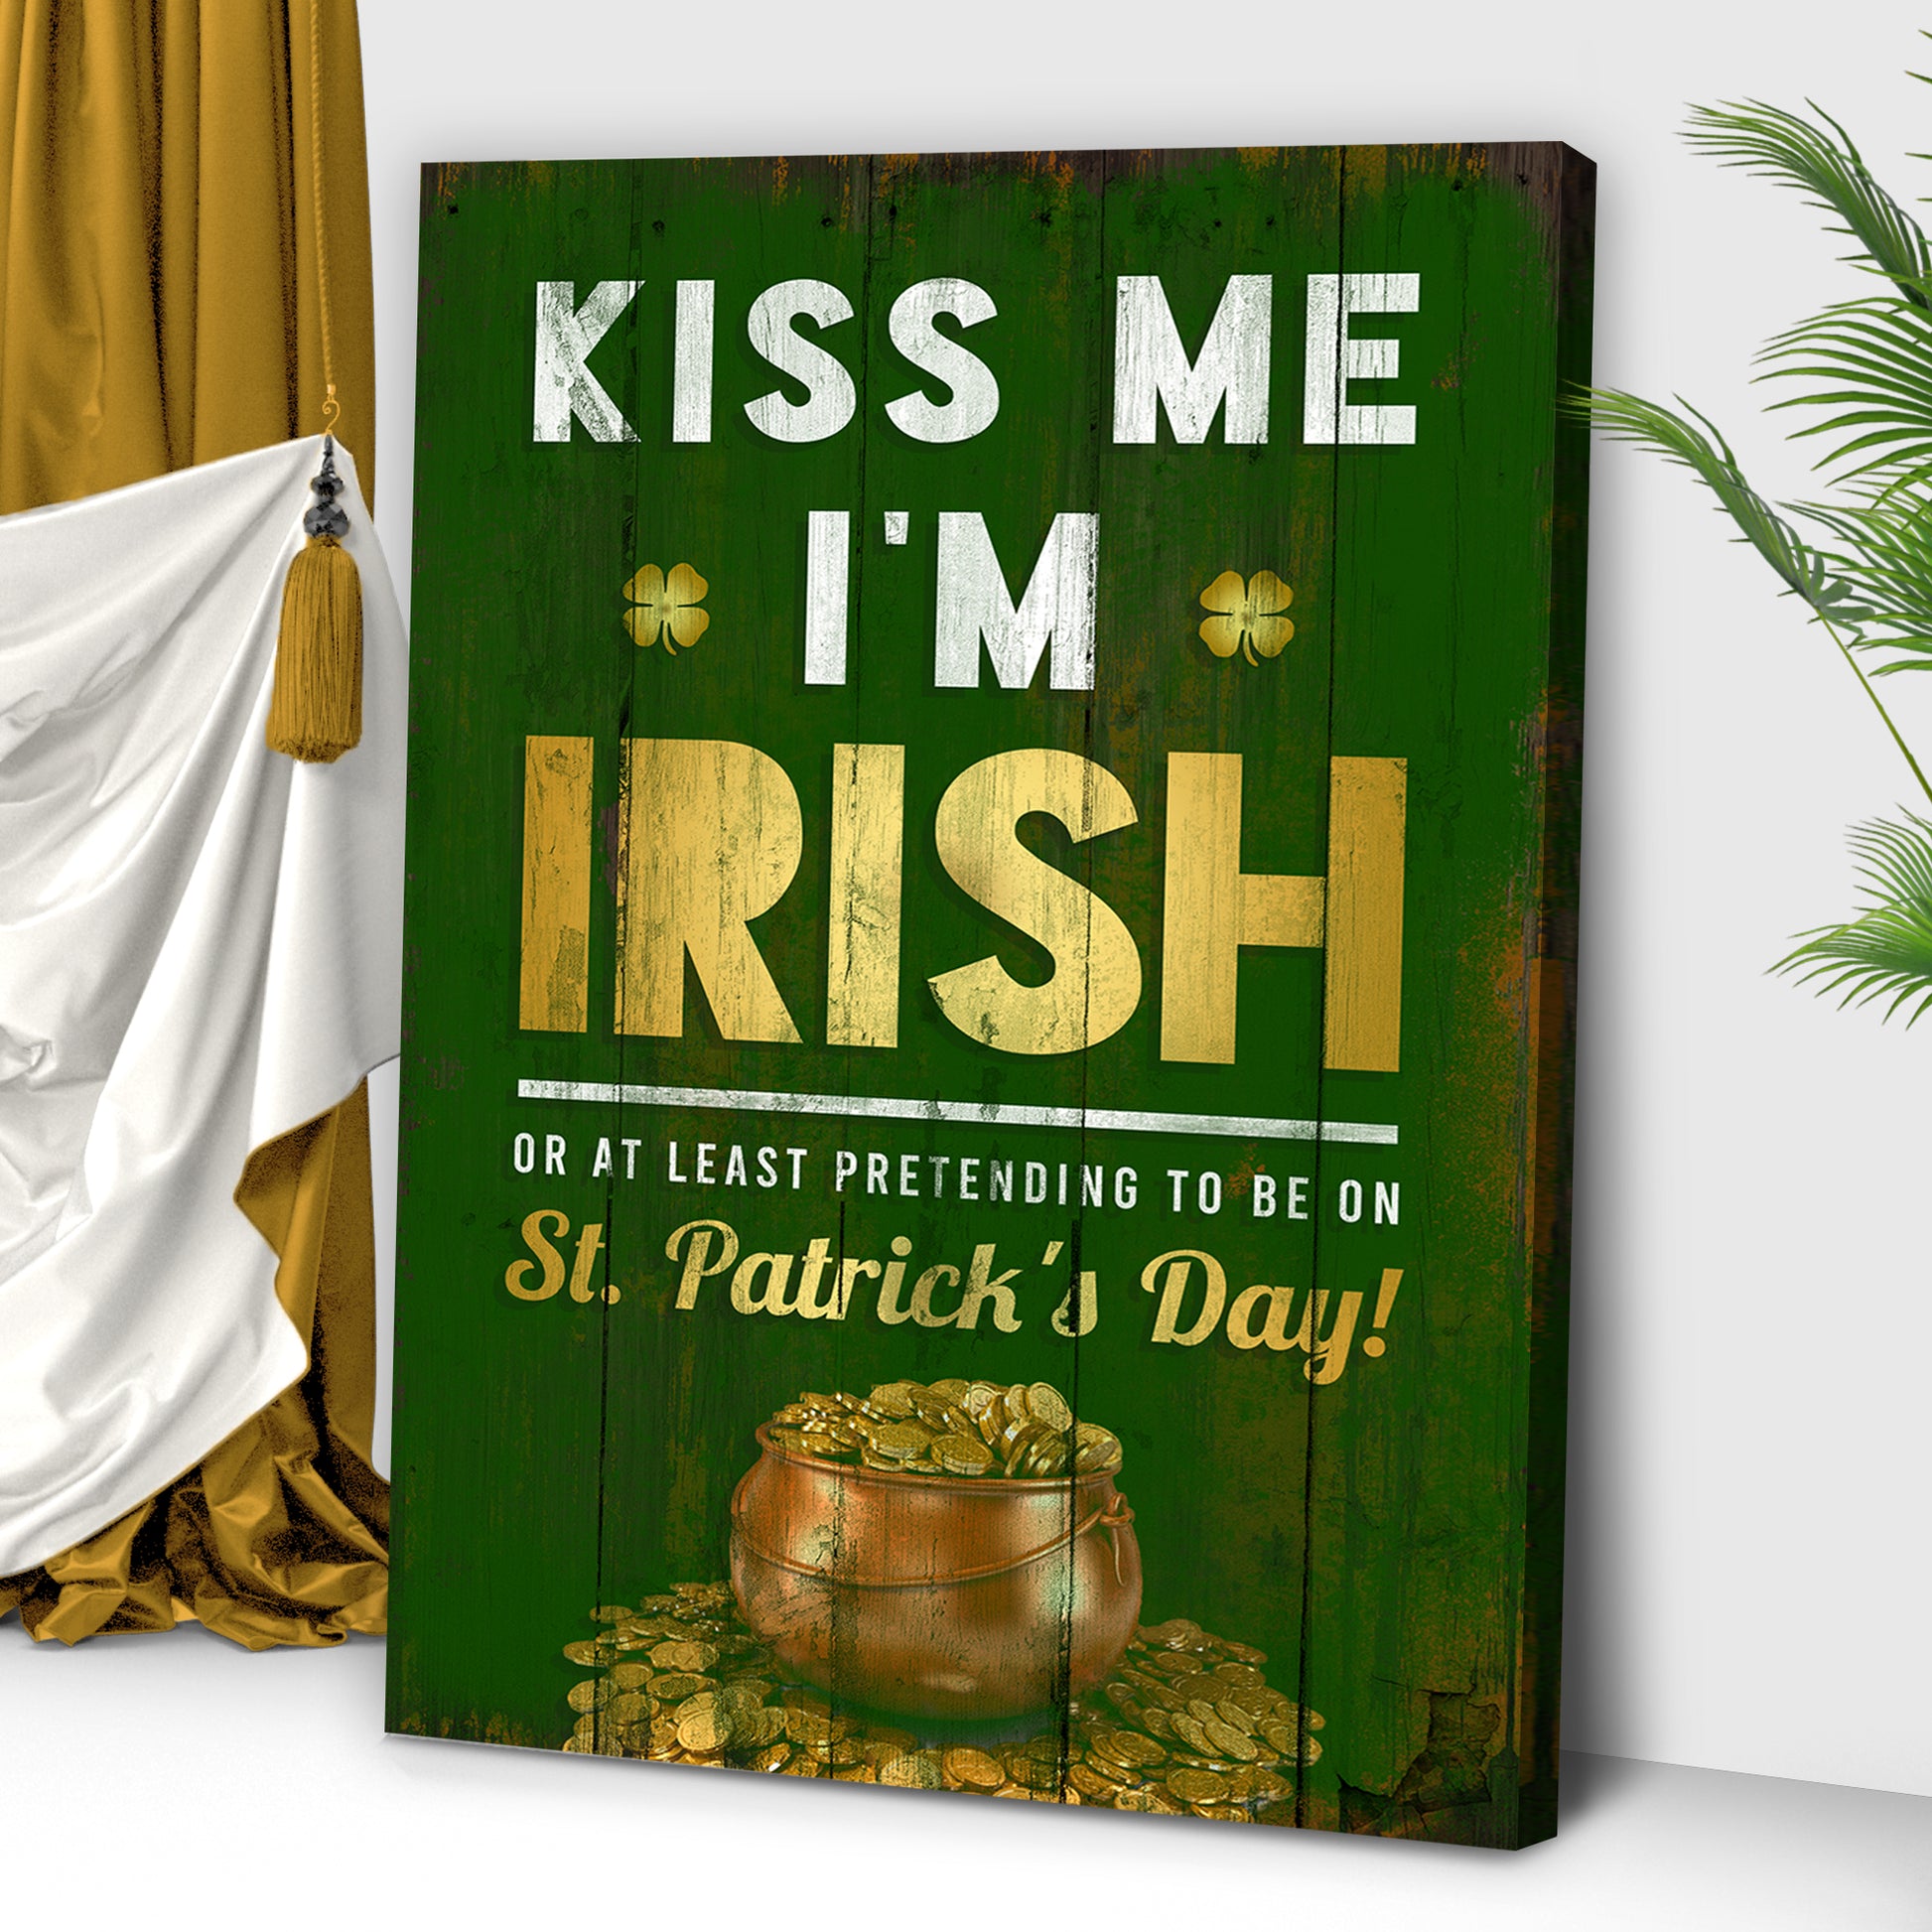 Kiss me, I'm Irish Sign Style 2 - Image by Tailored Canvases